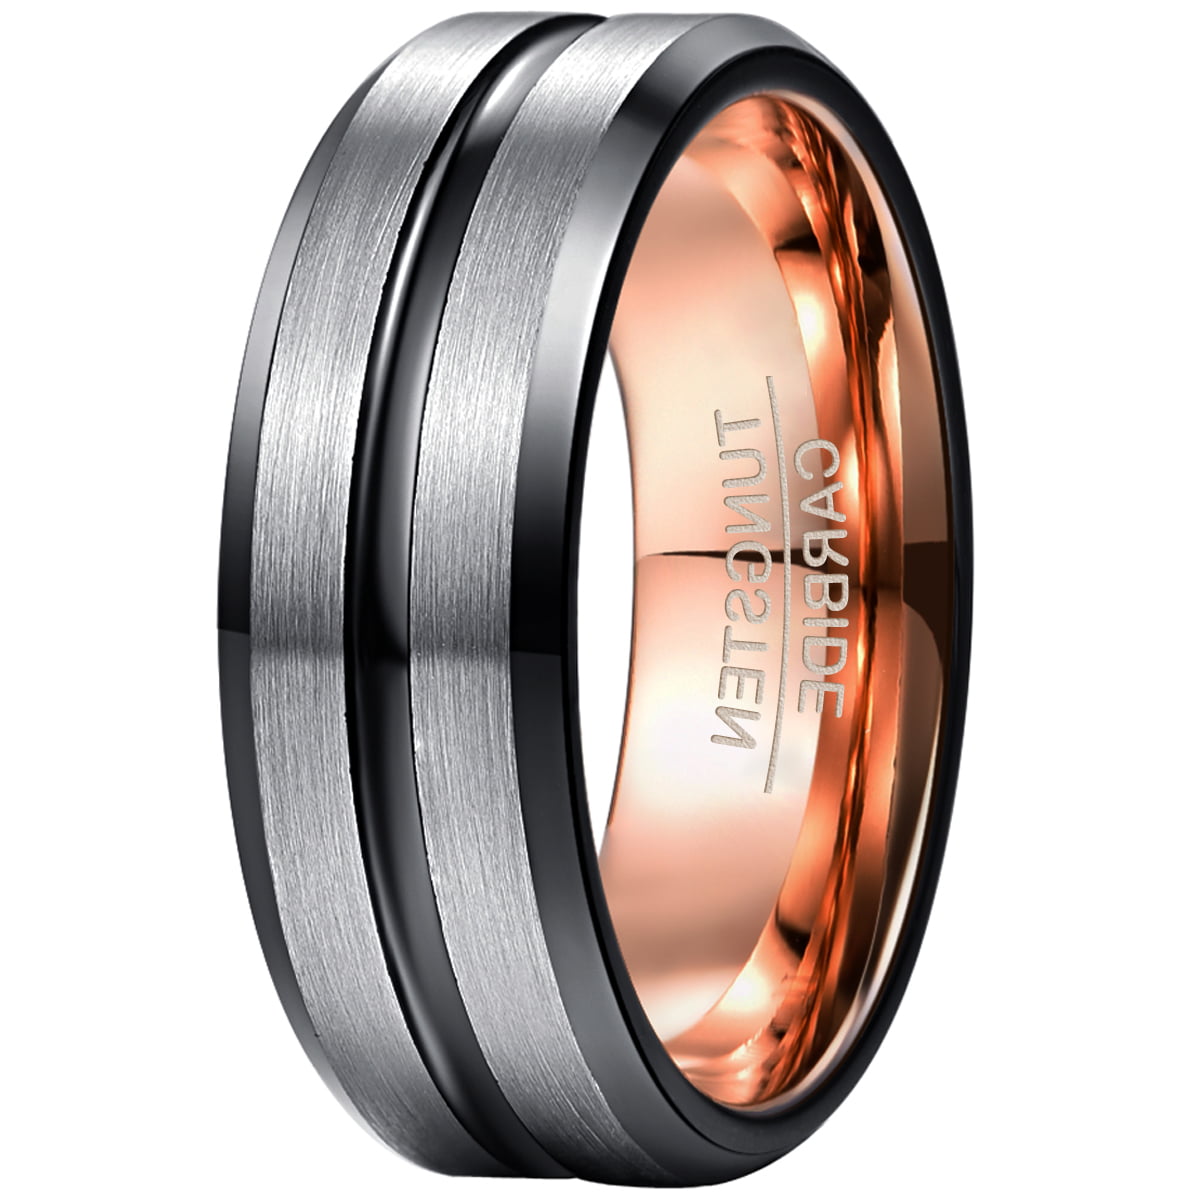 Mens Titanium Ring With Center Groove Promise Wedding Band Free Sizing 4 to 14 